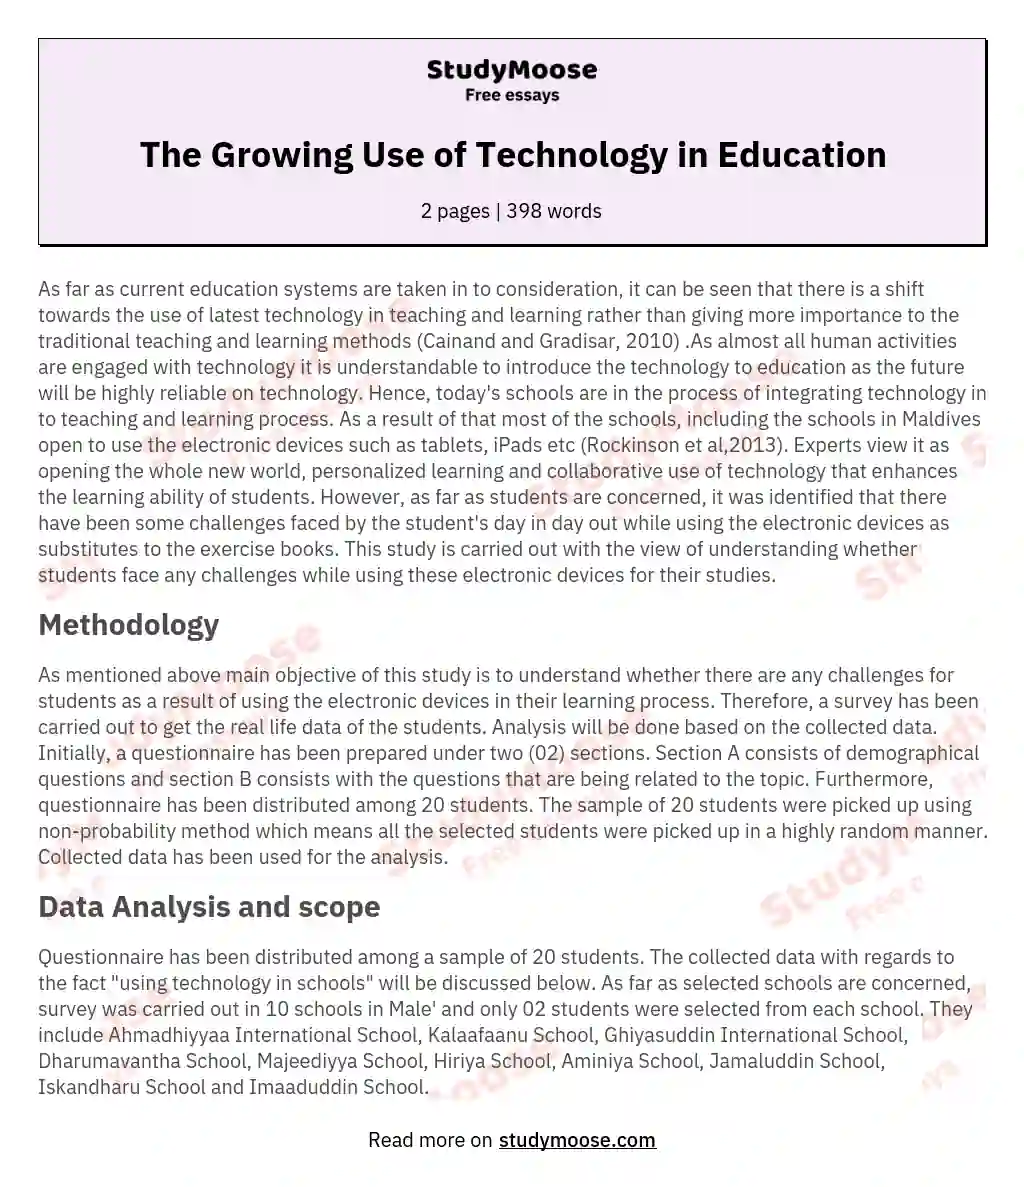 The Growing Use of Technology in Education essay